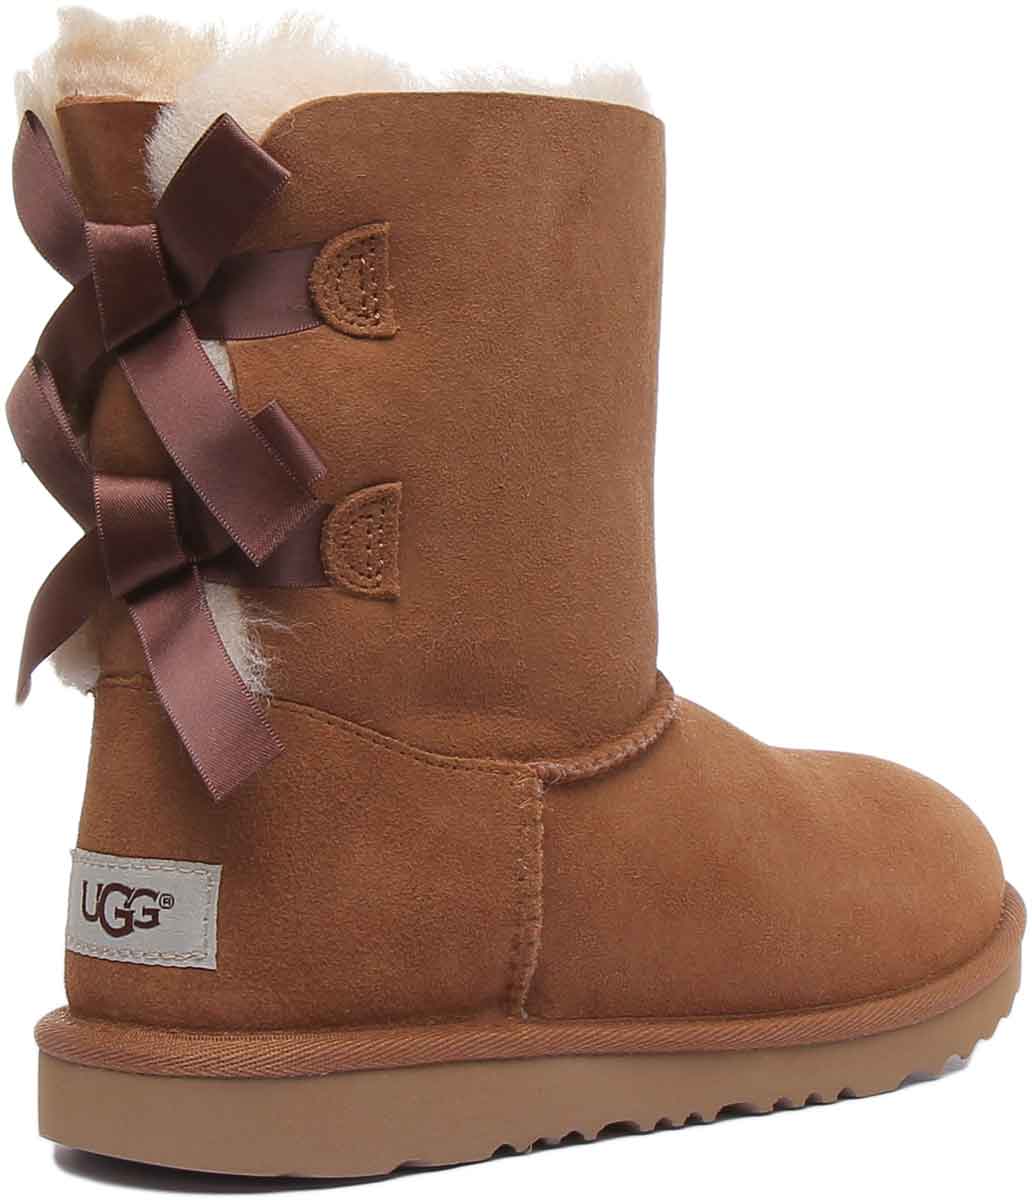 Ugg Australia K Bailey Bow 2 In Chestnut For Youth